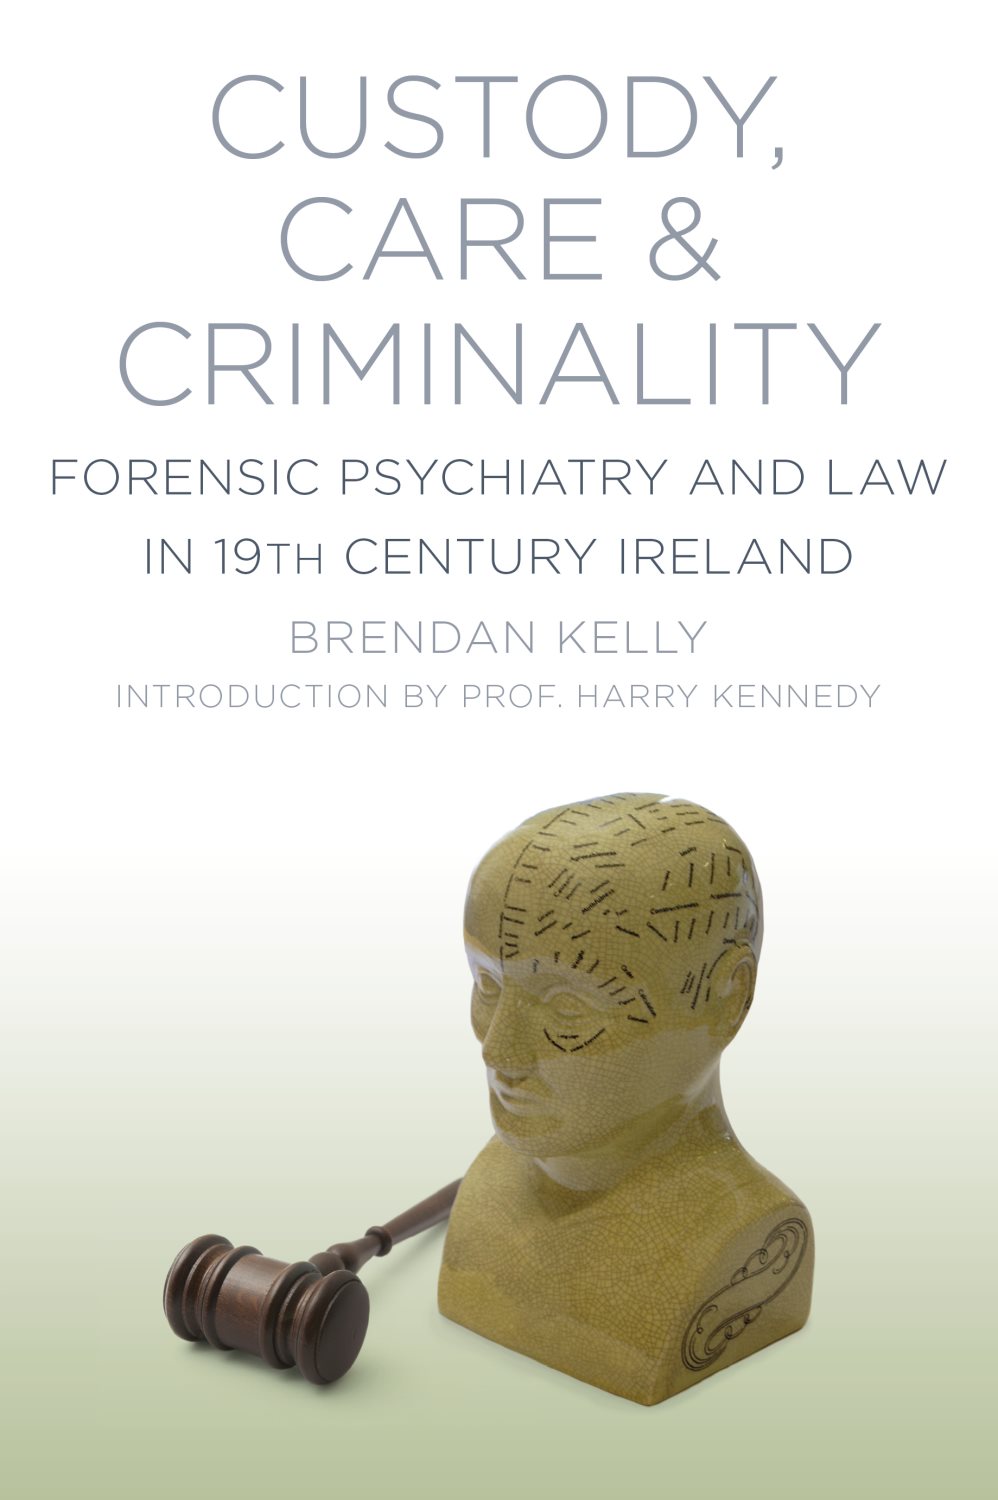 Custody, Care & Criminality: Forensic Psychiatry and Law in 19th Century Ireland